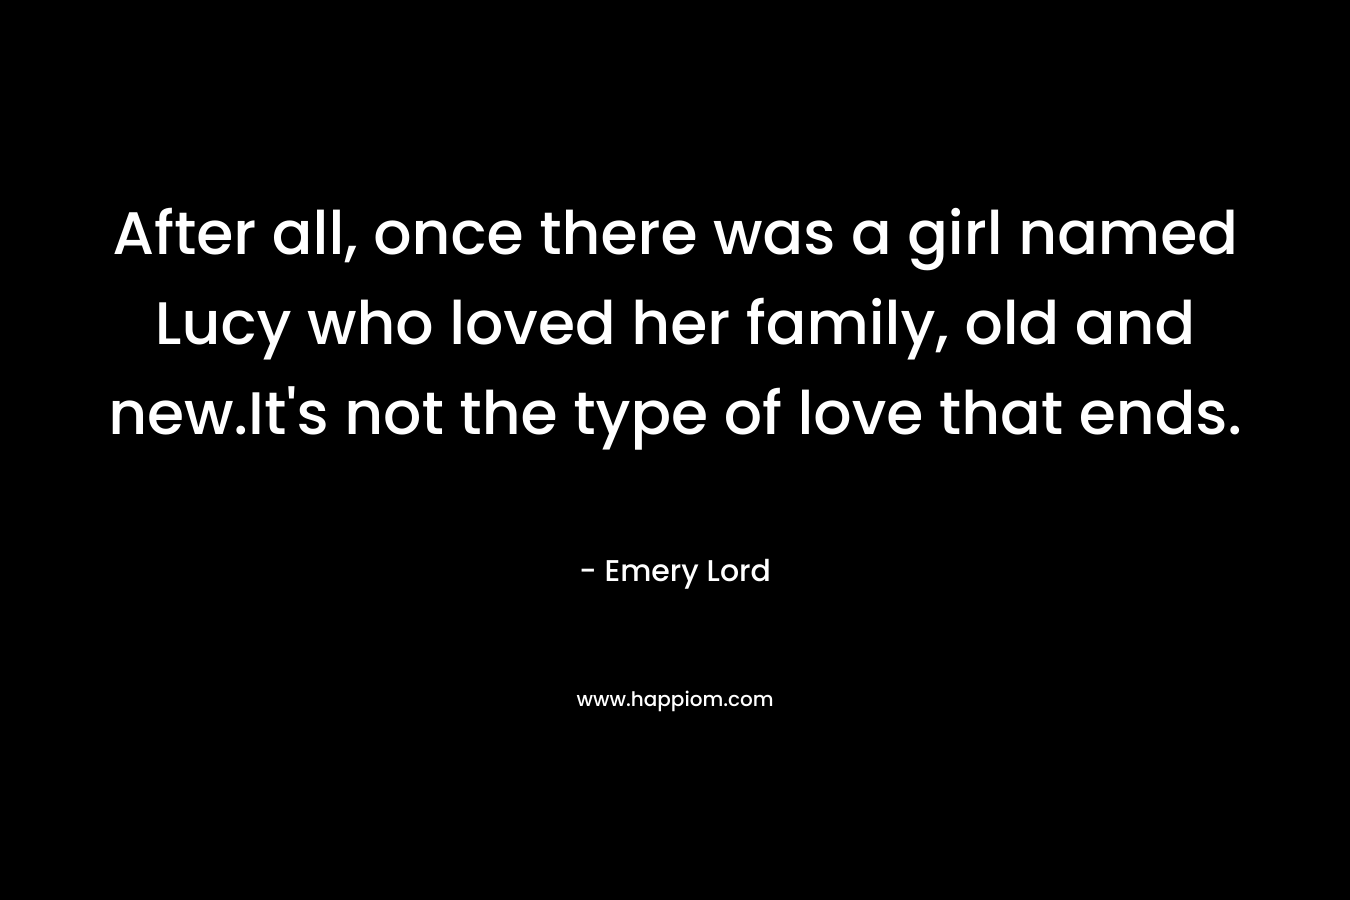 After all, once there was a girl named Lucy who loved her family, old and new.It’s not the type of love that ends. – Emery Lord